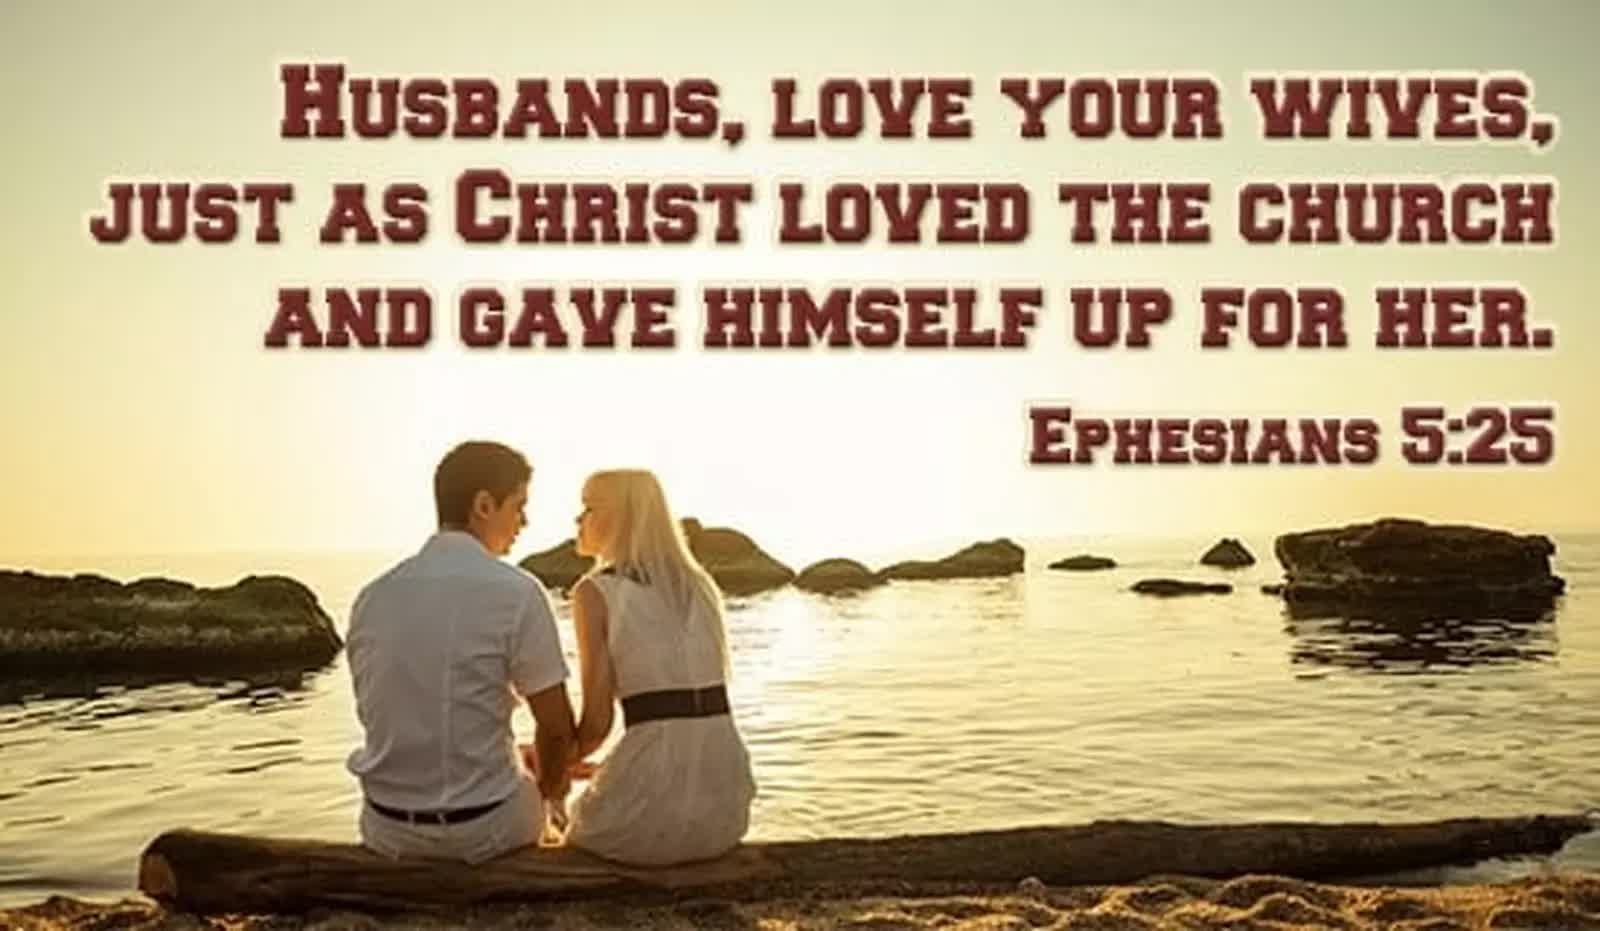 husband love your wives verse ephesians 5:24